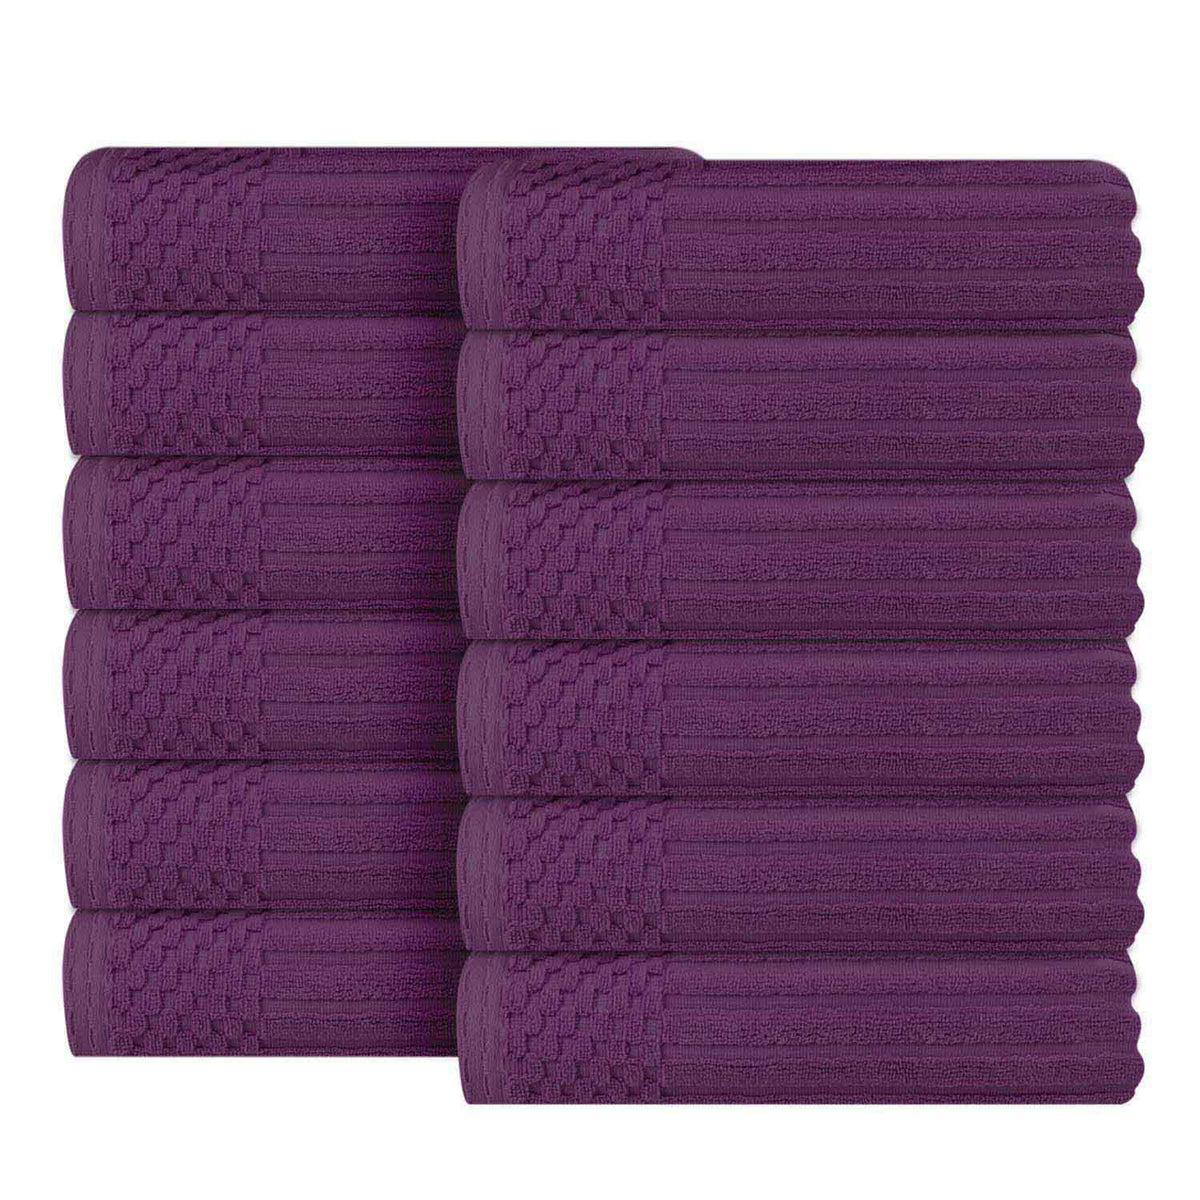 Soho Ribbed Cotton Absorbent Face Towel / Washcloth Set of 12 - Plum